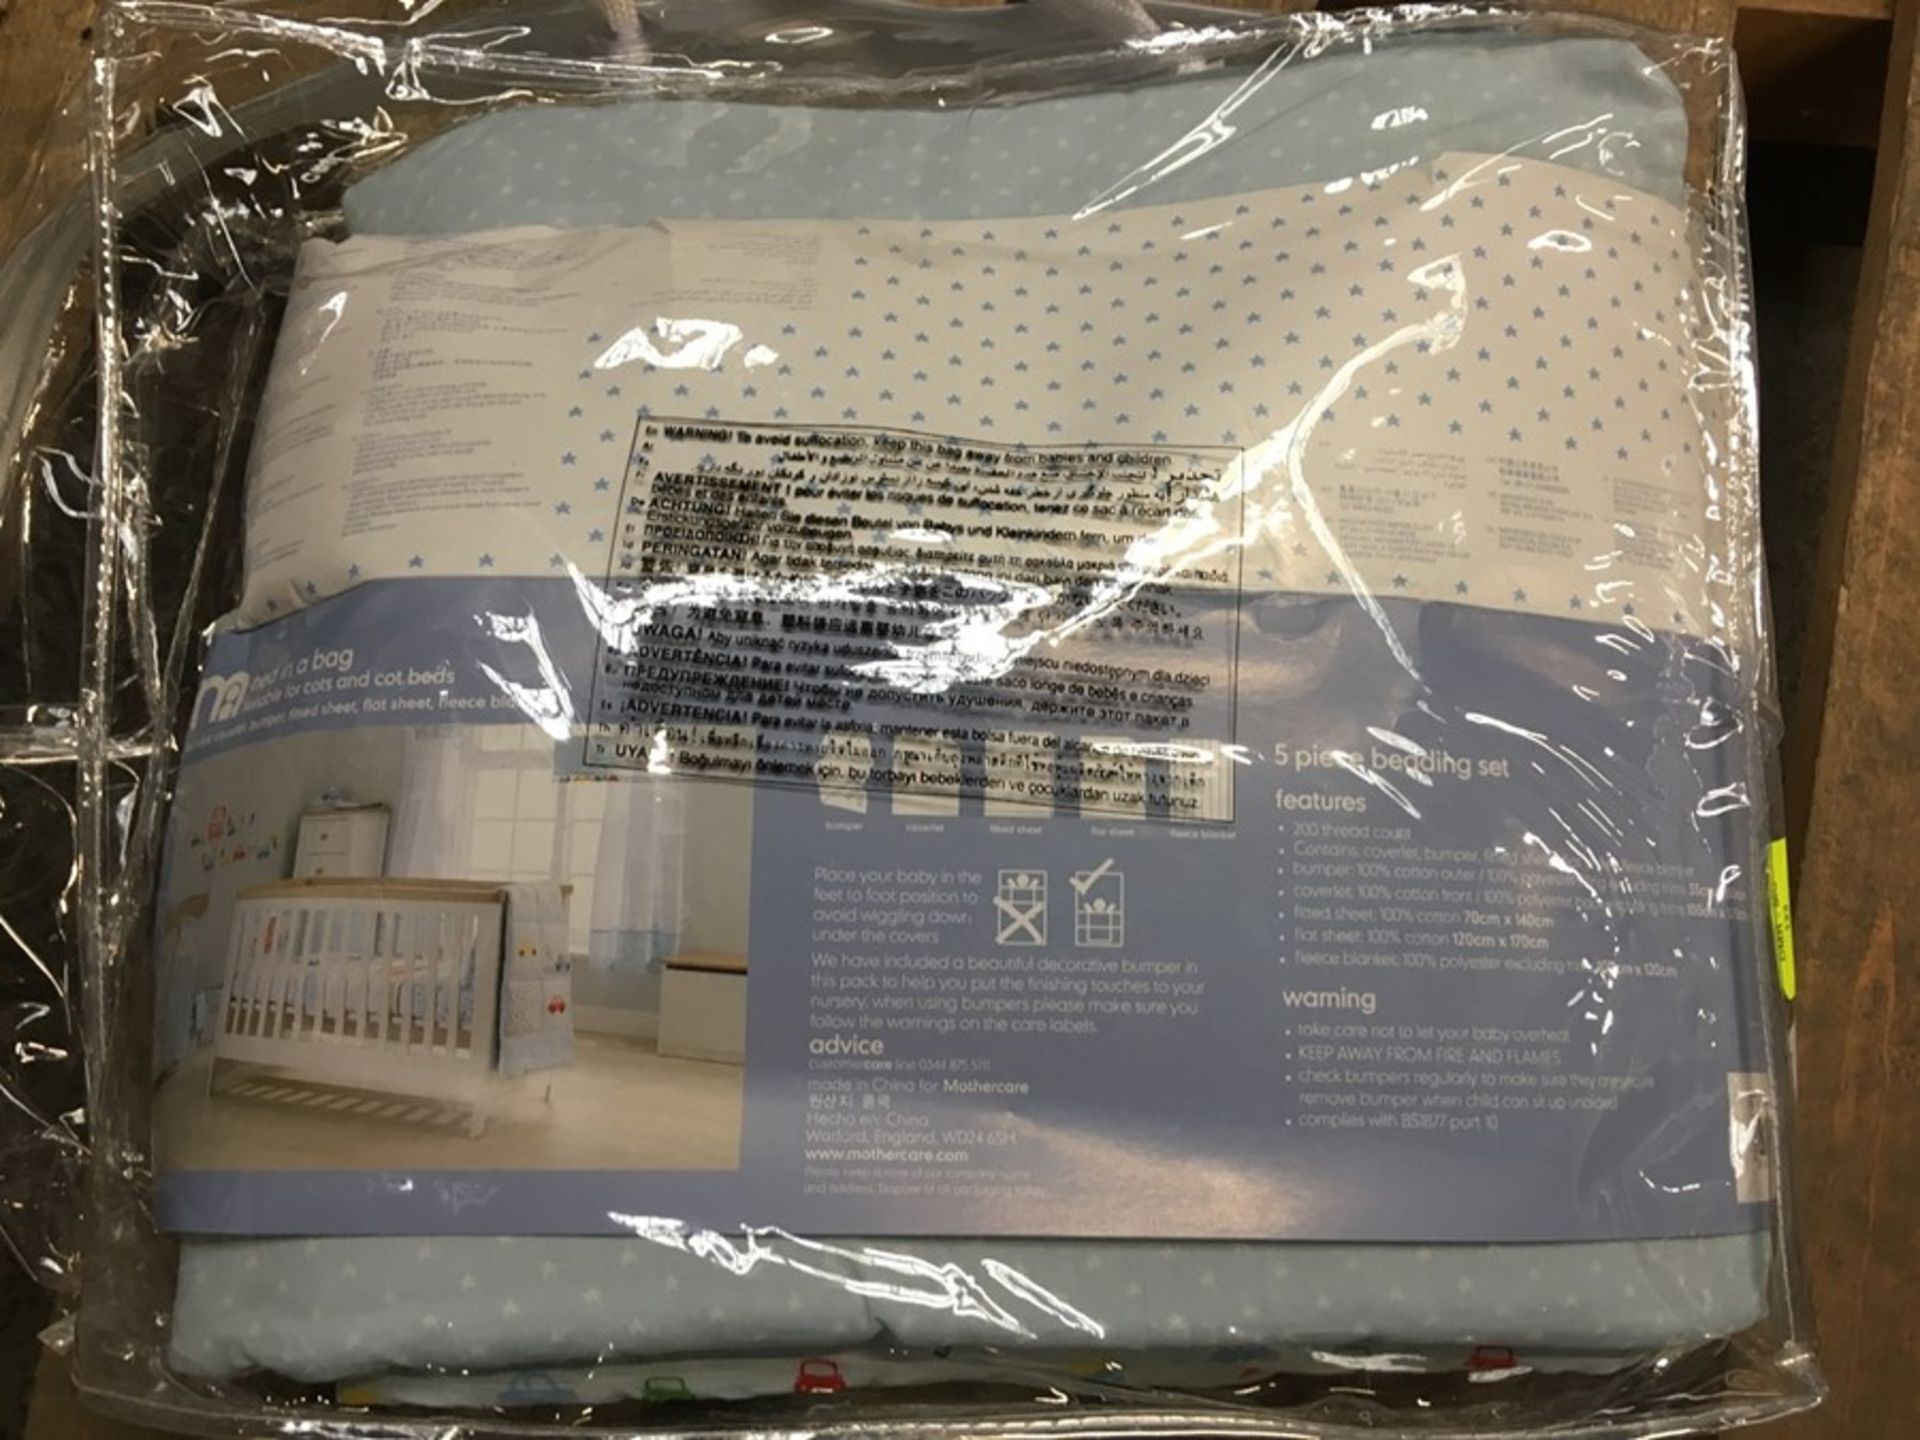 1 BAGGED MOTHERCARE BED IN BAG - ON THE ROAD / RRP £90.00 (PUBLIC VIEWING AVAILABLE)